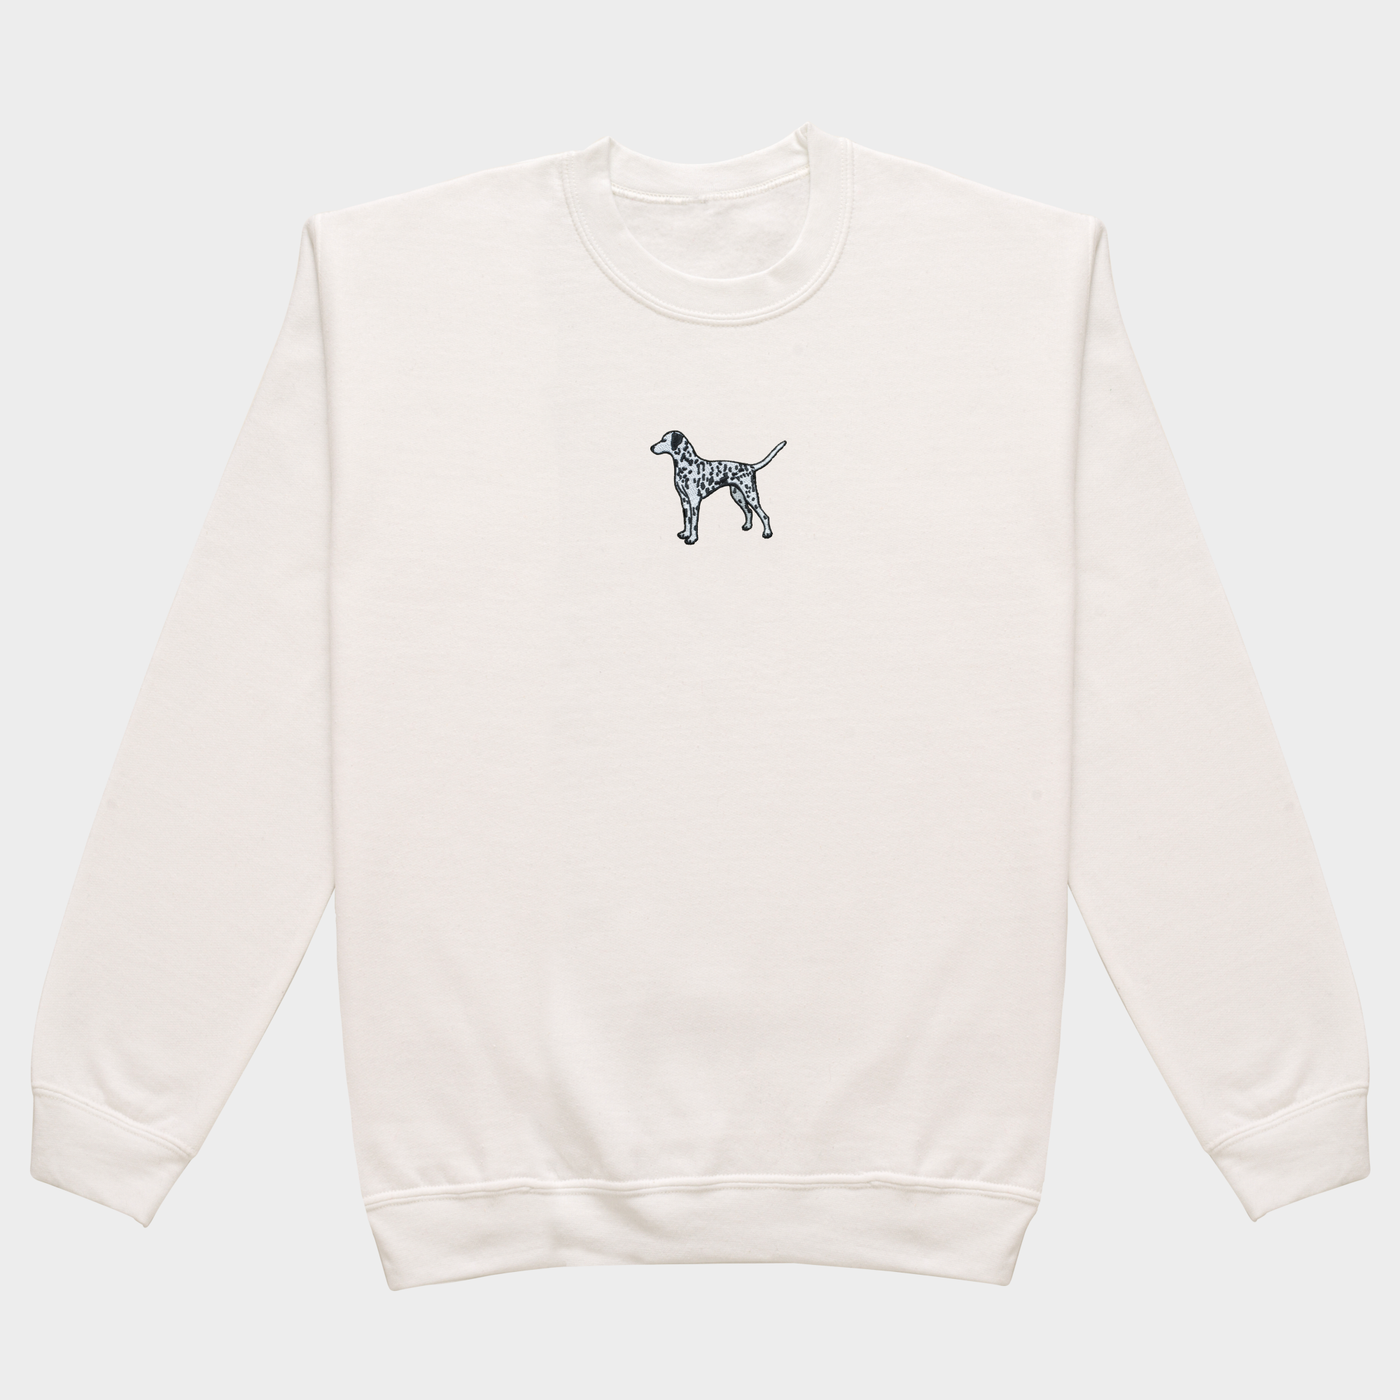 Bobby's Planet Women's Embroidered Dalmatian Sweatshirt from Paws Dog Cat Animals Collection in White Color#color_white